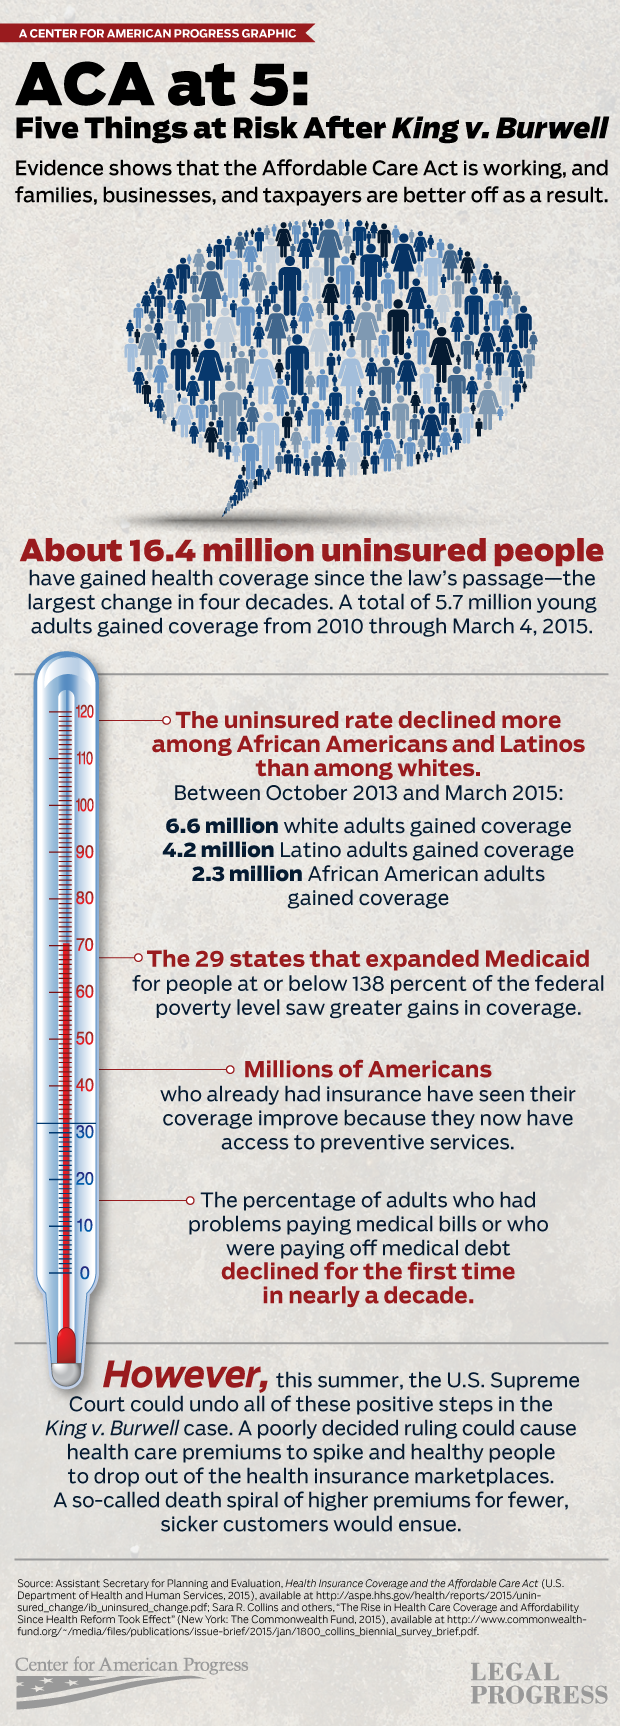 ACA at 5 infographic